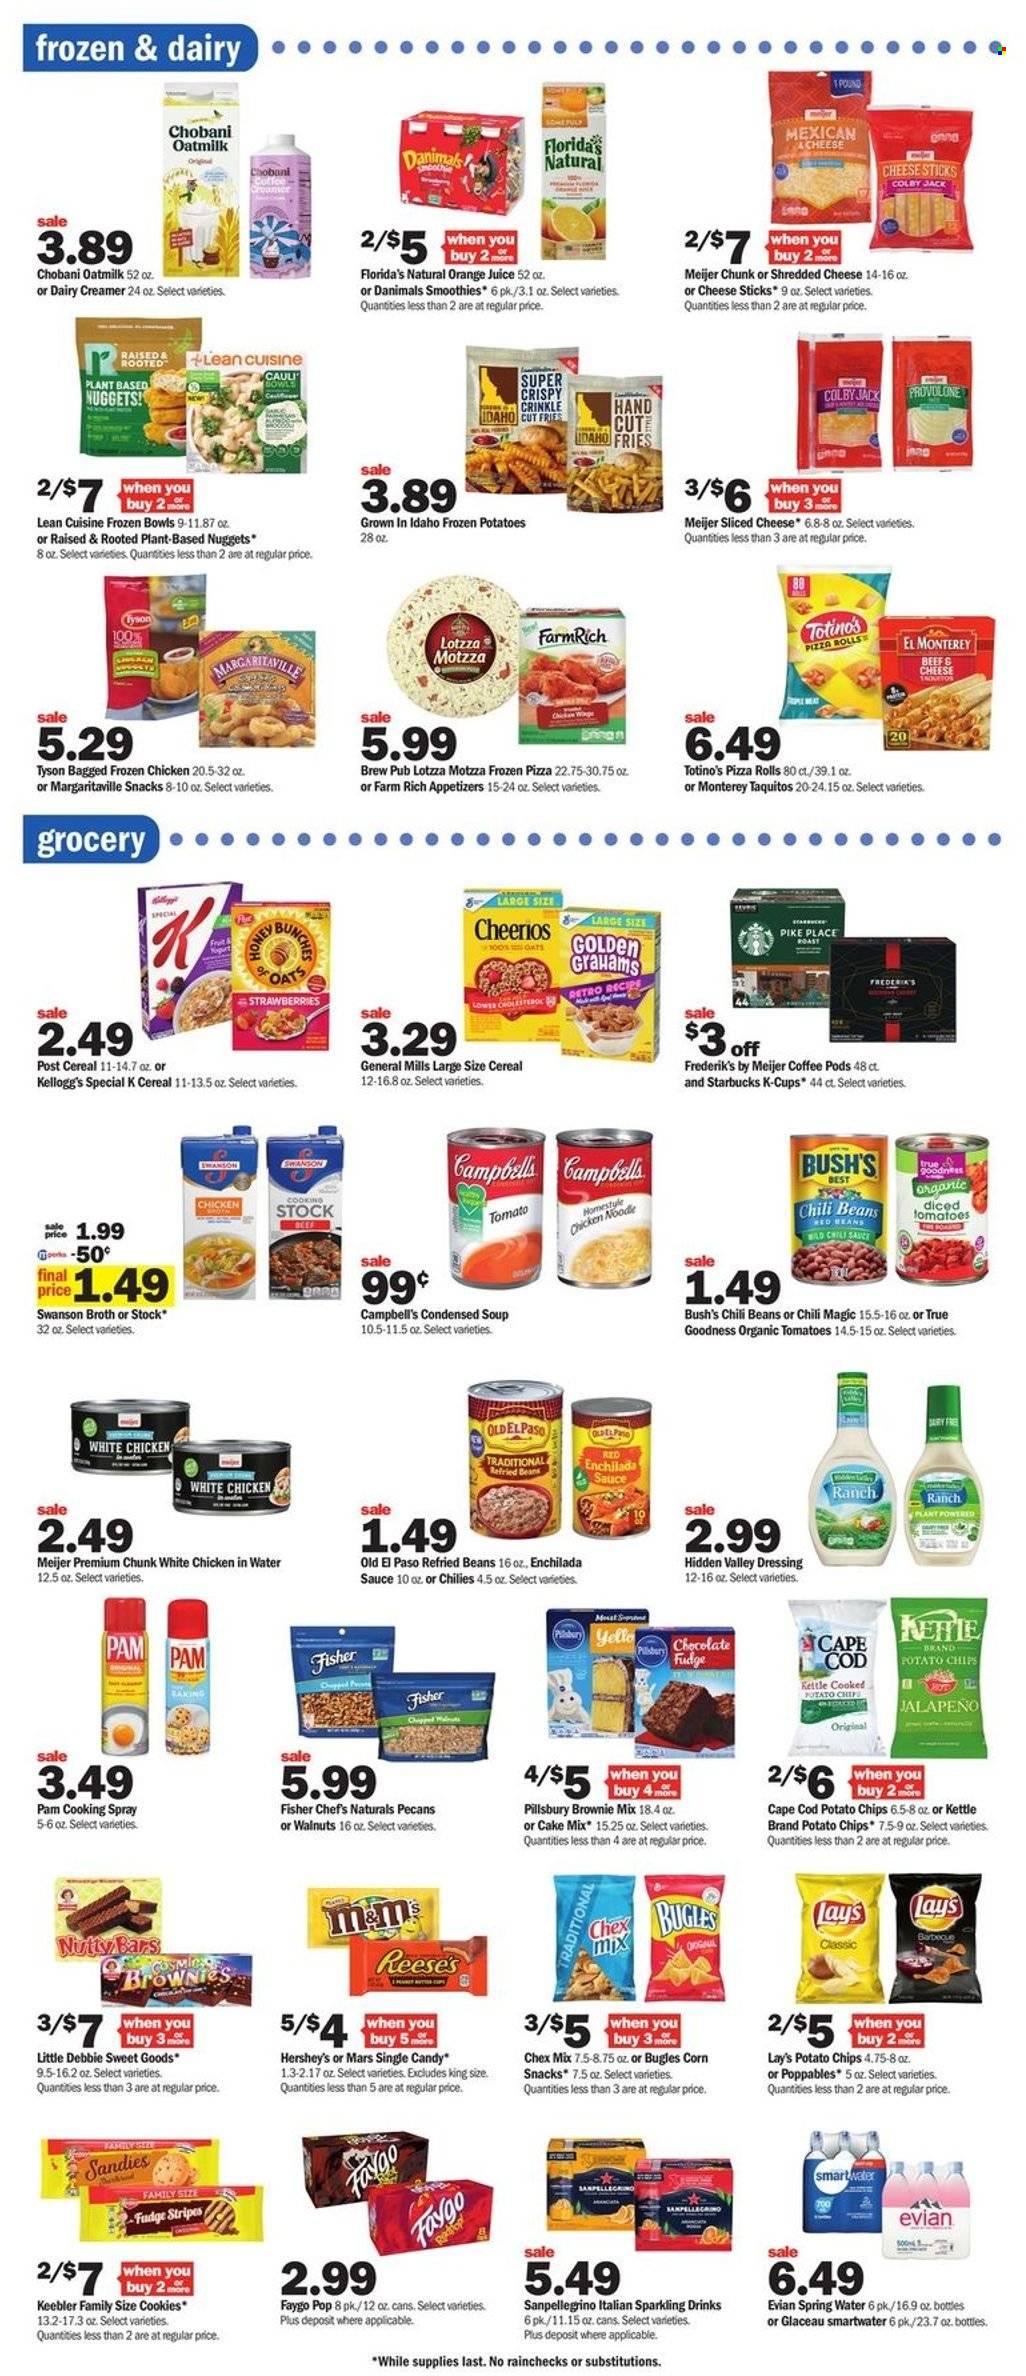 thumbnail - Meijer Flyer - 11/27/2022 - 12/03/2022 - Sales products - pizza rolls, Old El Paso, brownie mix, cake mix, jalapeño, cod, Campbell's, pizza, condensed soup, soup, nuggets, sauce, Pillsbury, noodles, instant soup, Lean Cuisine, taquitos, Colby cheese, shredded cheese, sliced cheese, Provolone, Chobani, Danimals, oat milk, creamer, Reese's, Hershey's, cheese sticks, potato fries, cookies, fudge, chocolate, snack, Mars, Kellogg's, Florida's Natural, Keebler, potato chips, Lay’s, Chex Mix, oats, broth, enchilada sauce, red beans, refried beans, chili beans, diced tomatoes, cereals, Cheerios, chilli sauce, dressing, cooking spray, walnuts, pecans, orange juice, juice, smoothie, spring water, Smartwater, Evian, coffee pods, Starbucks, coffee capsules, K-Cups. Page 5.